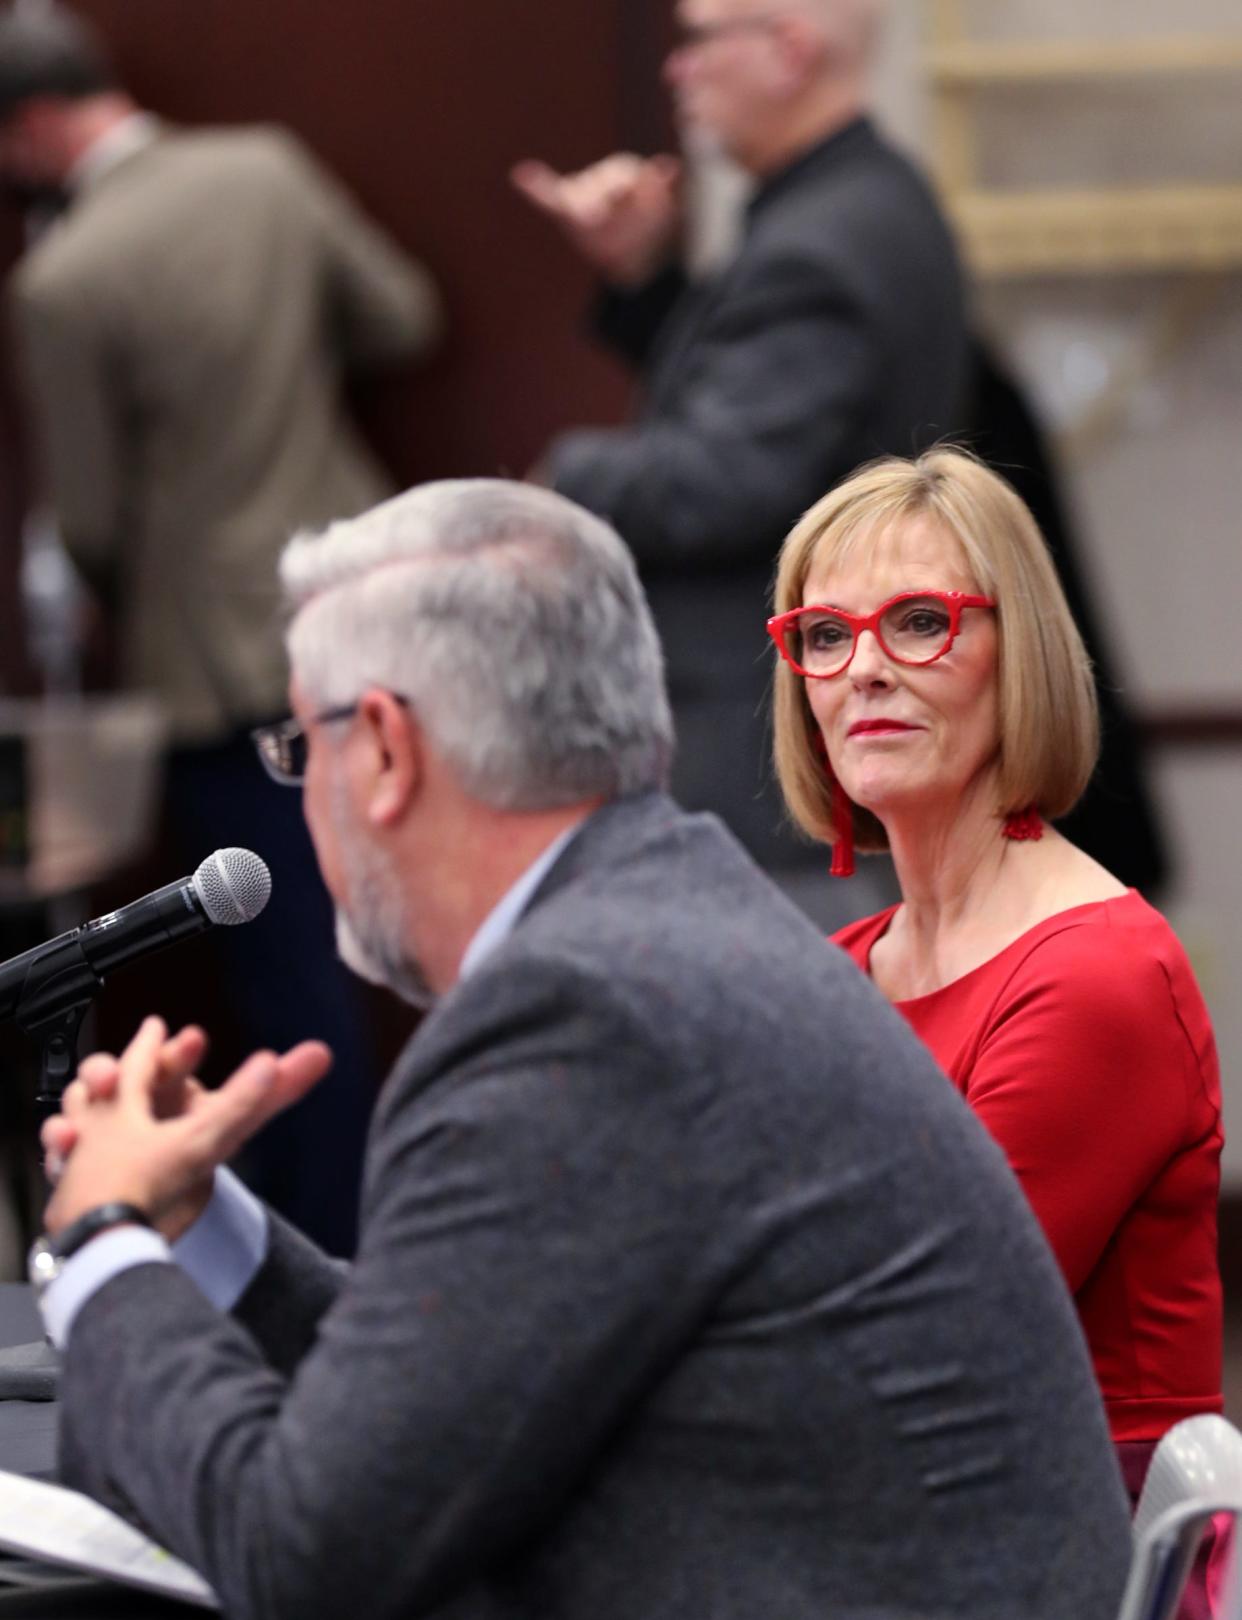 Lt. Gov. Suzanne Crouch, right, listens as Gov. Eric Holcomb speaks about his 2022 agenda Monday, Jan. 3, 2022 at the Indiana Government Center South in Indianapolis.